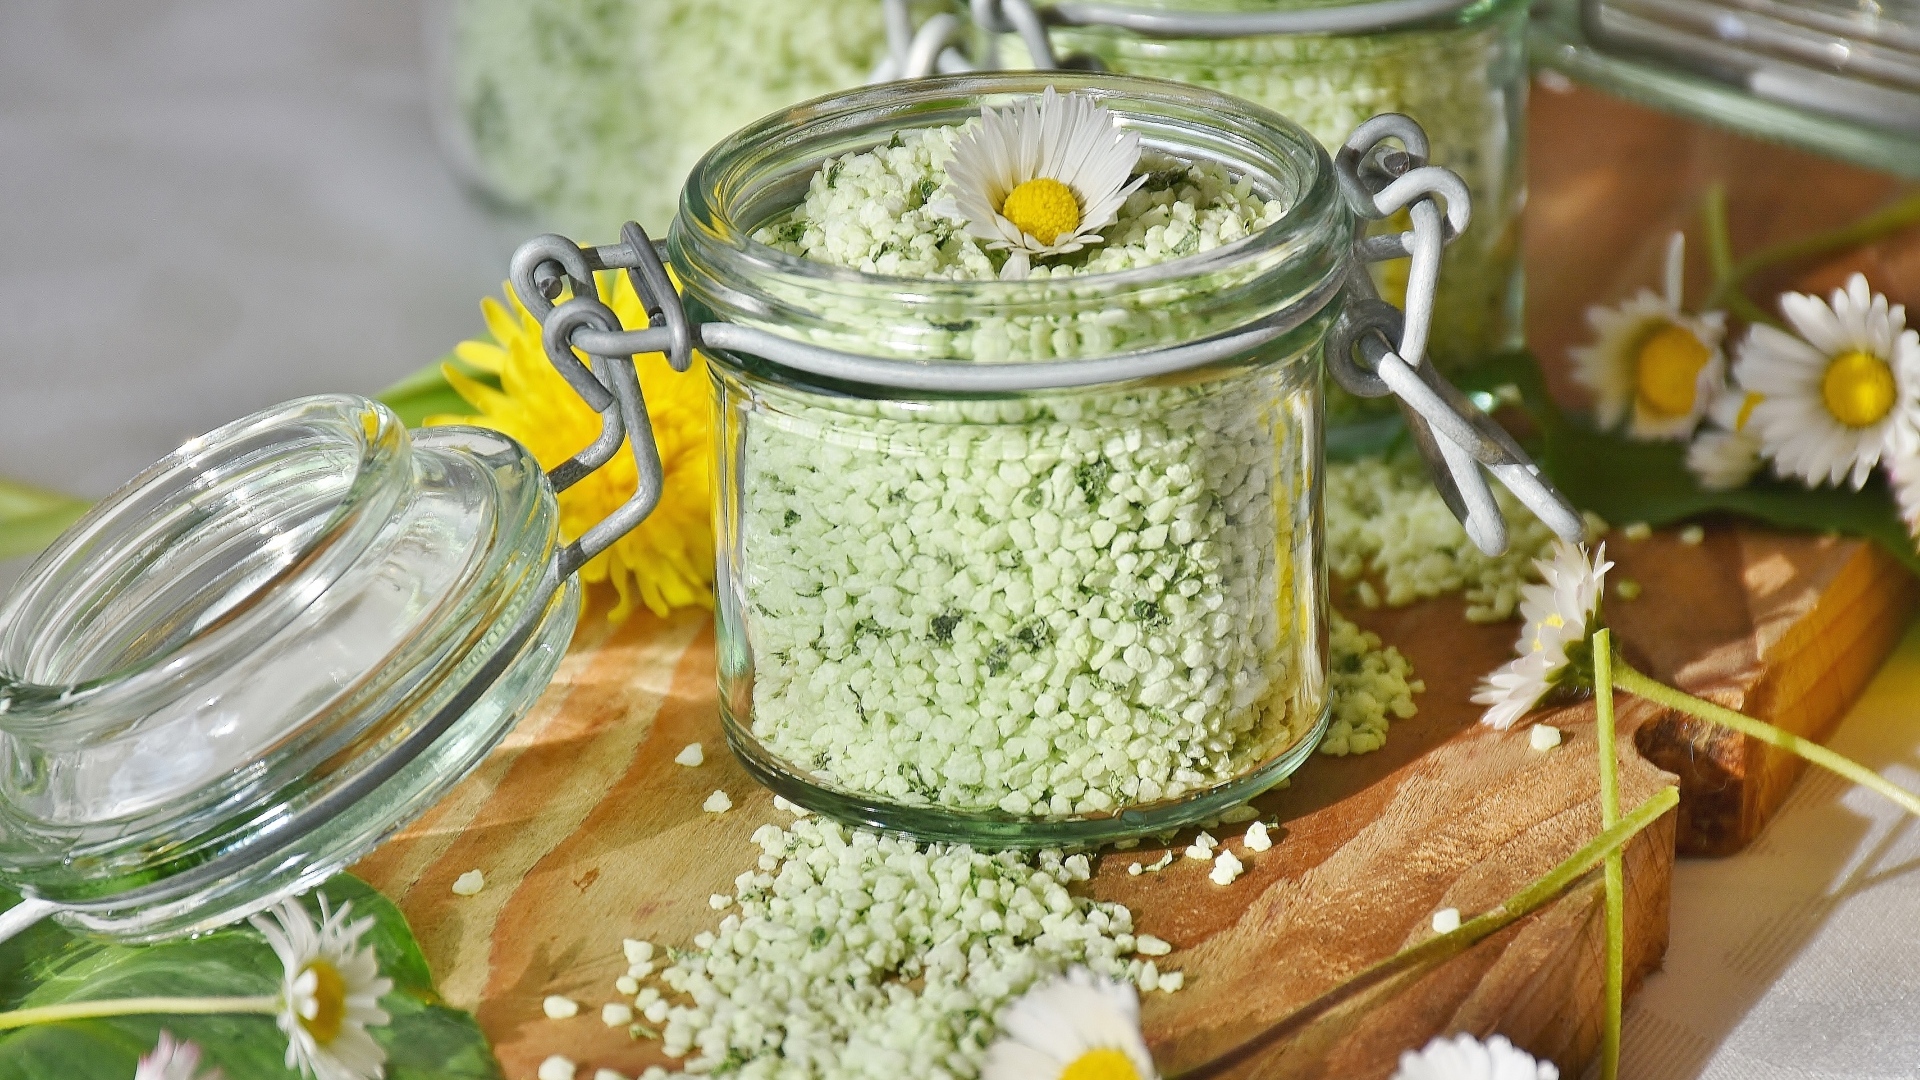 Salt in a jar with chamomile flowers